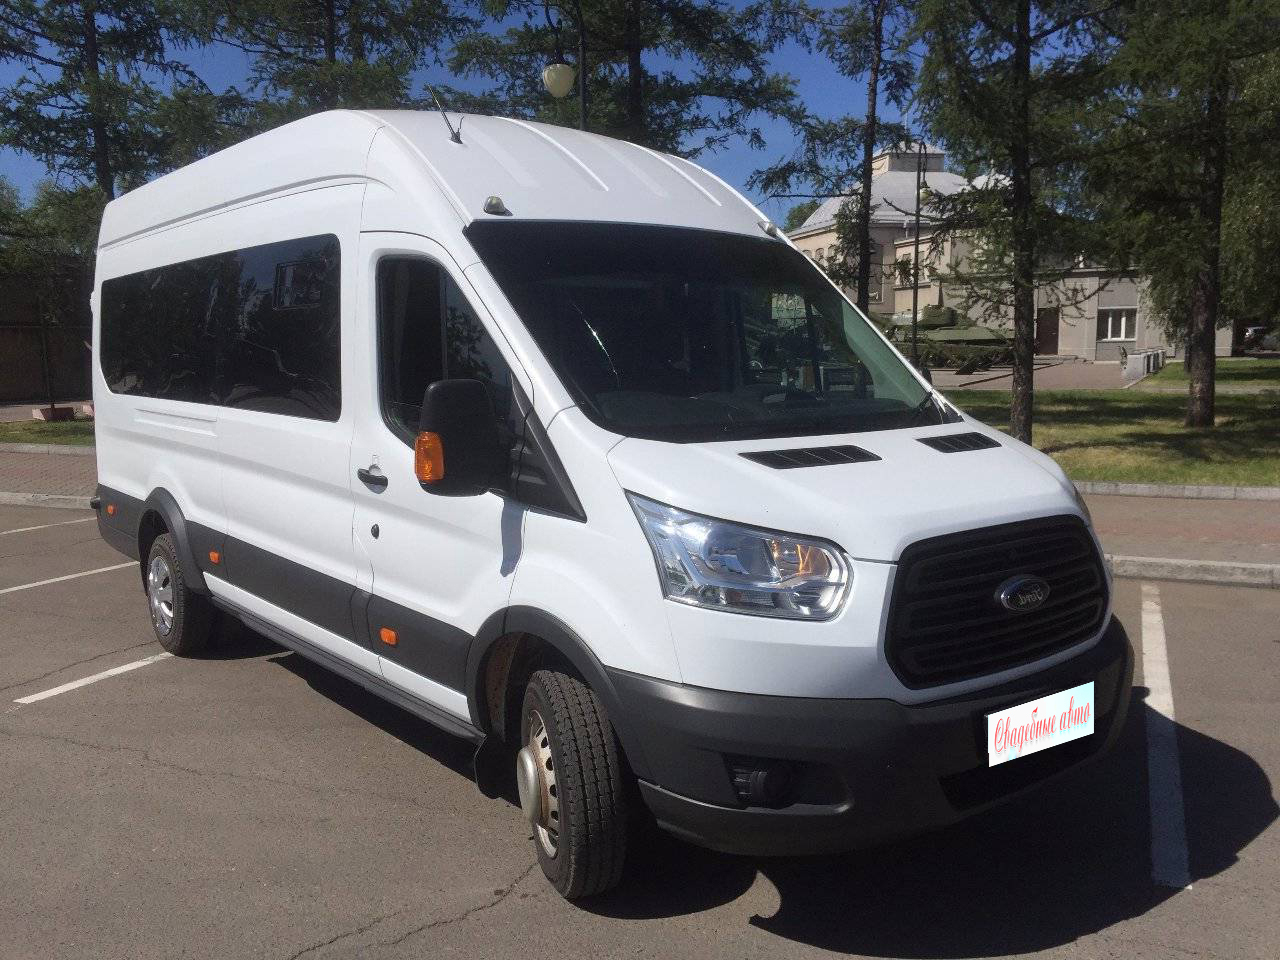 Форд транзит 13. Ford Transit 2015. Ford Transit белый 2015. Форд Транзит 25 мест. Форд Транзит 2015 пассажирский.